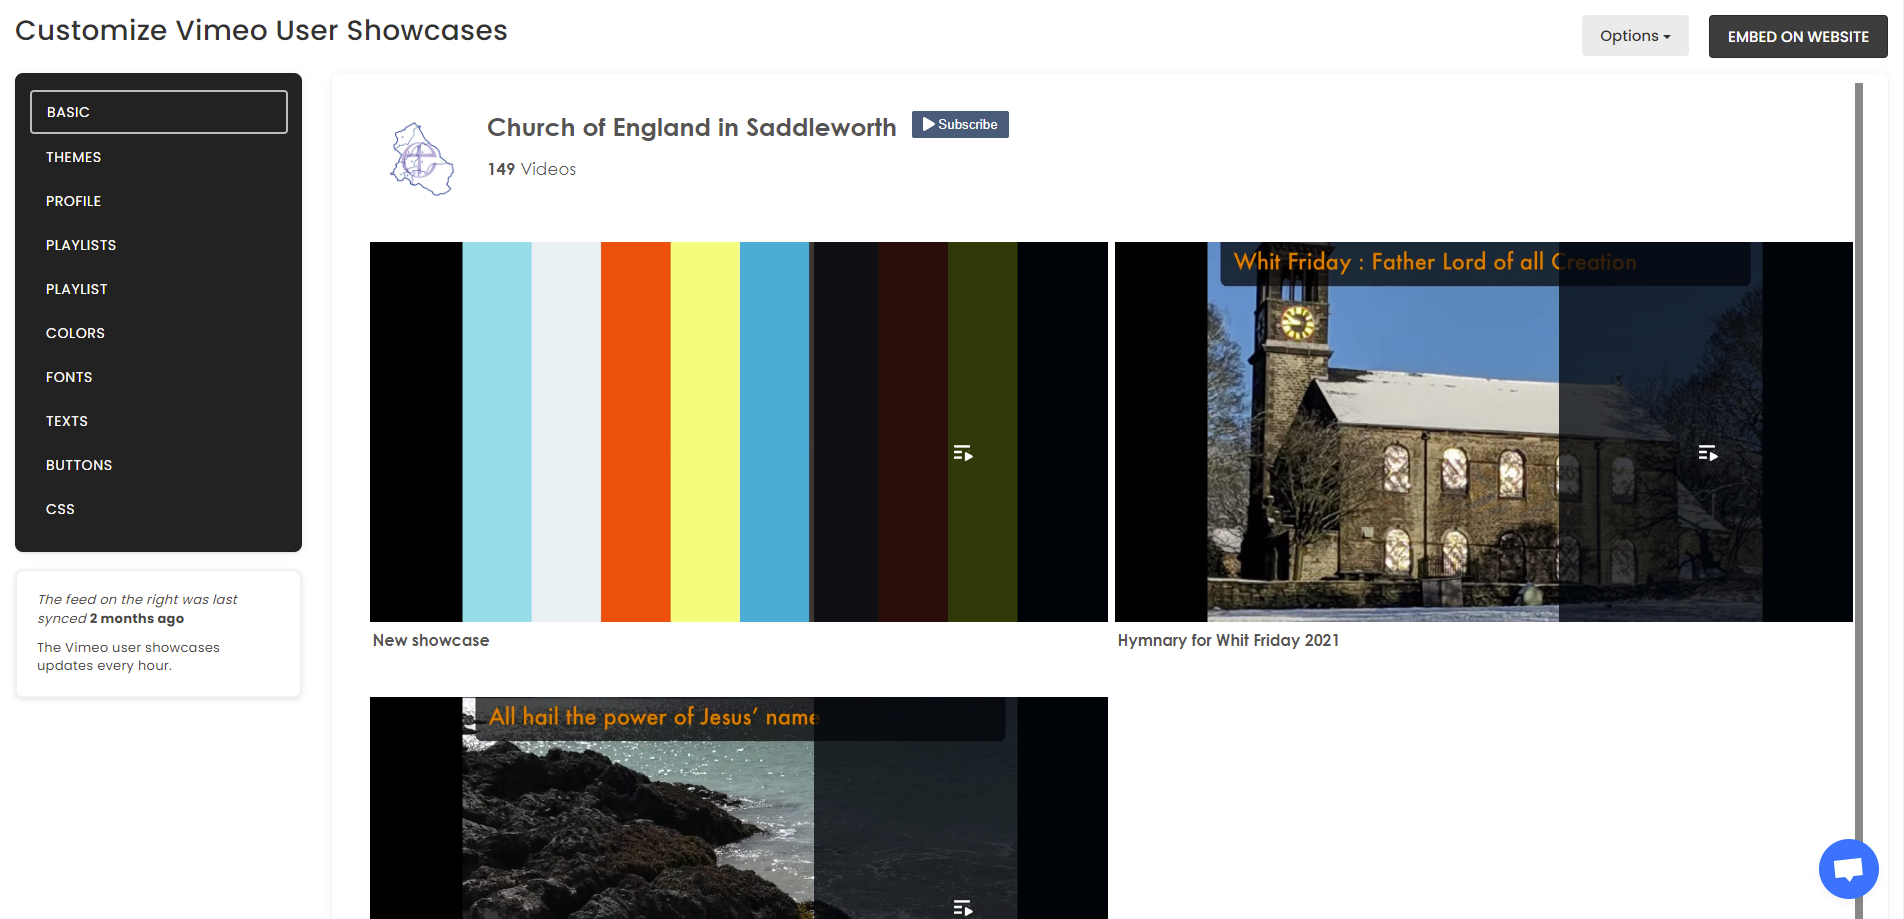 Customize your feed - How To Embed Vimeo User Showcases On Wix Website For Free?